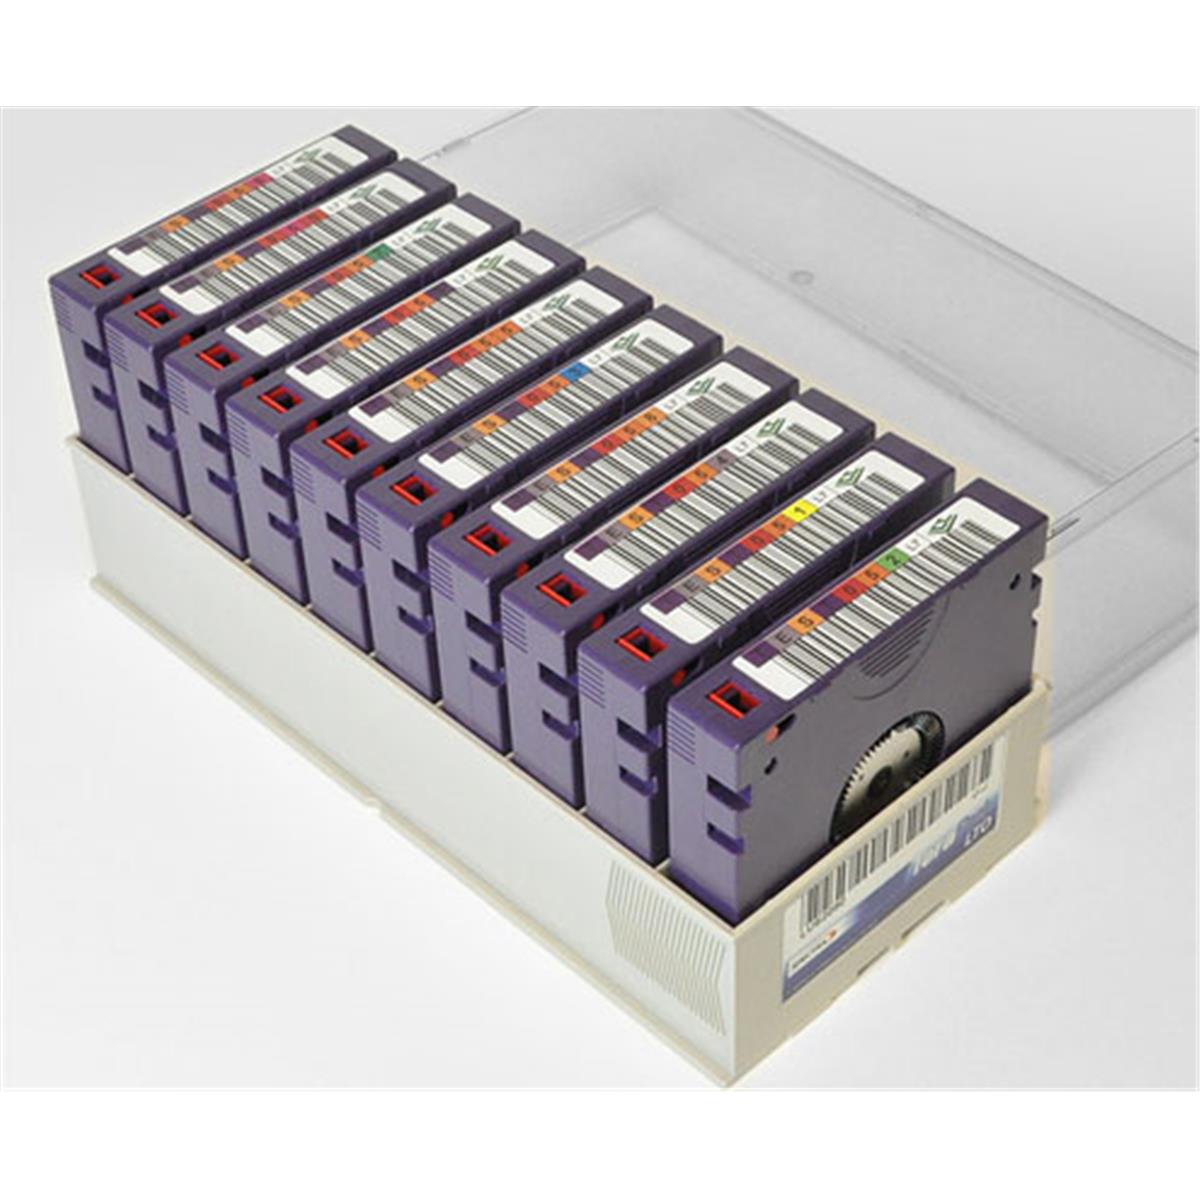 Picture of HP HPQ2078AN LTO - 8 Ultrium 30TB RW Non Labeled Library Data Cartridges with Cases